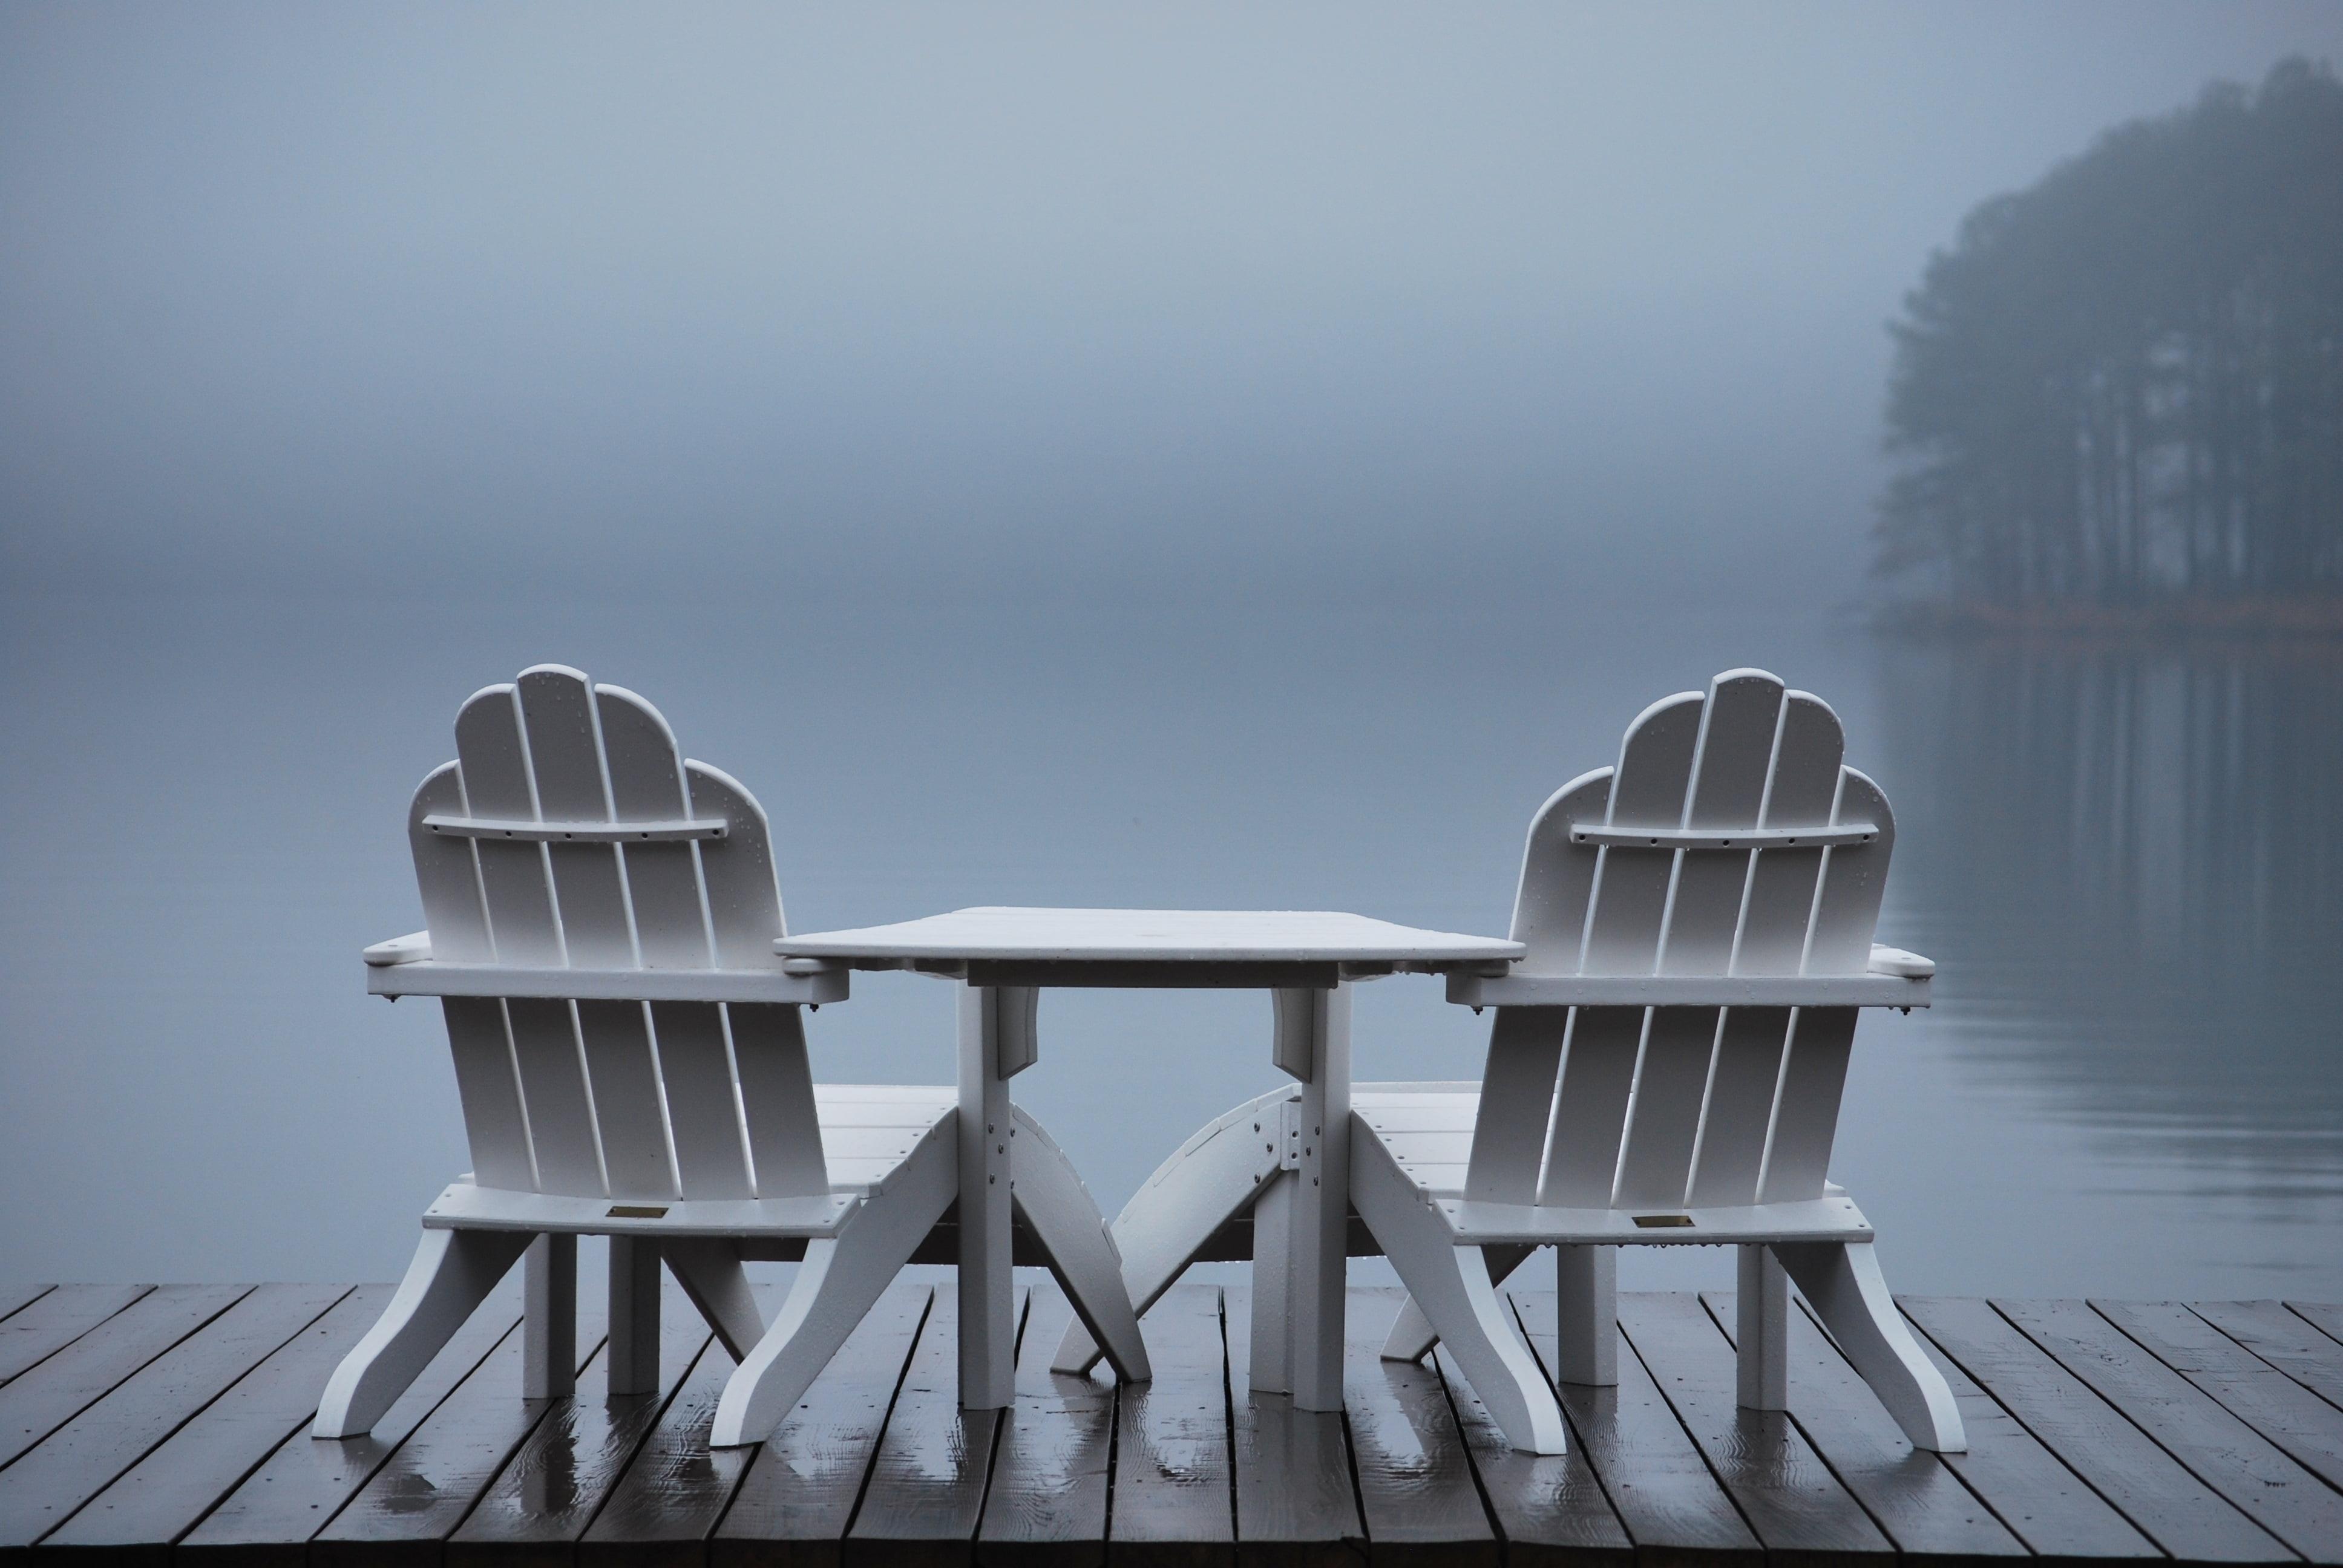 Table in between two adirondack chair on dock facing calm waters